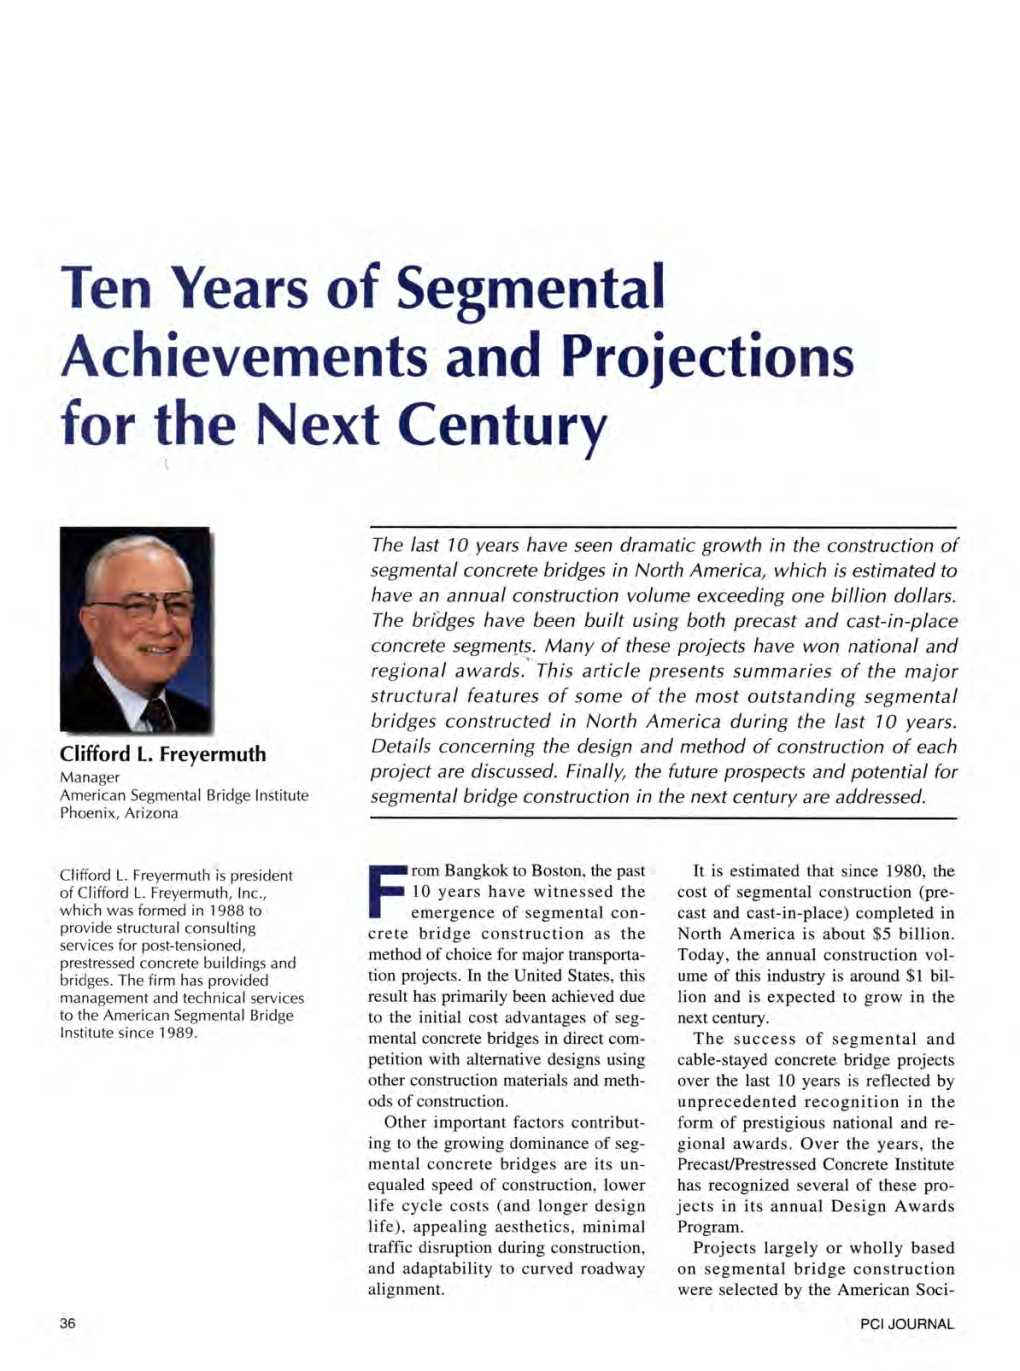 Ten Years of Segmental Achievements and Projections for ~He Next Century